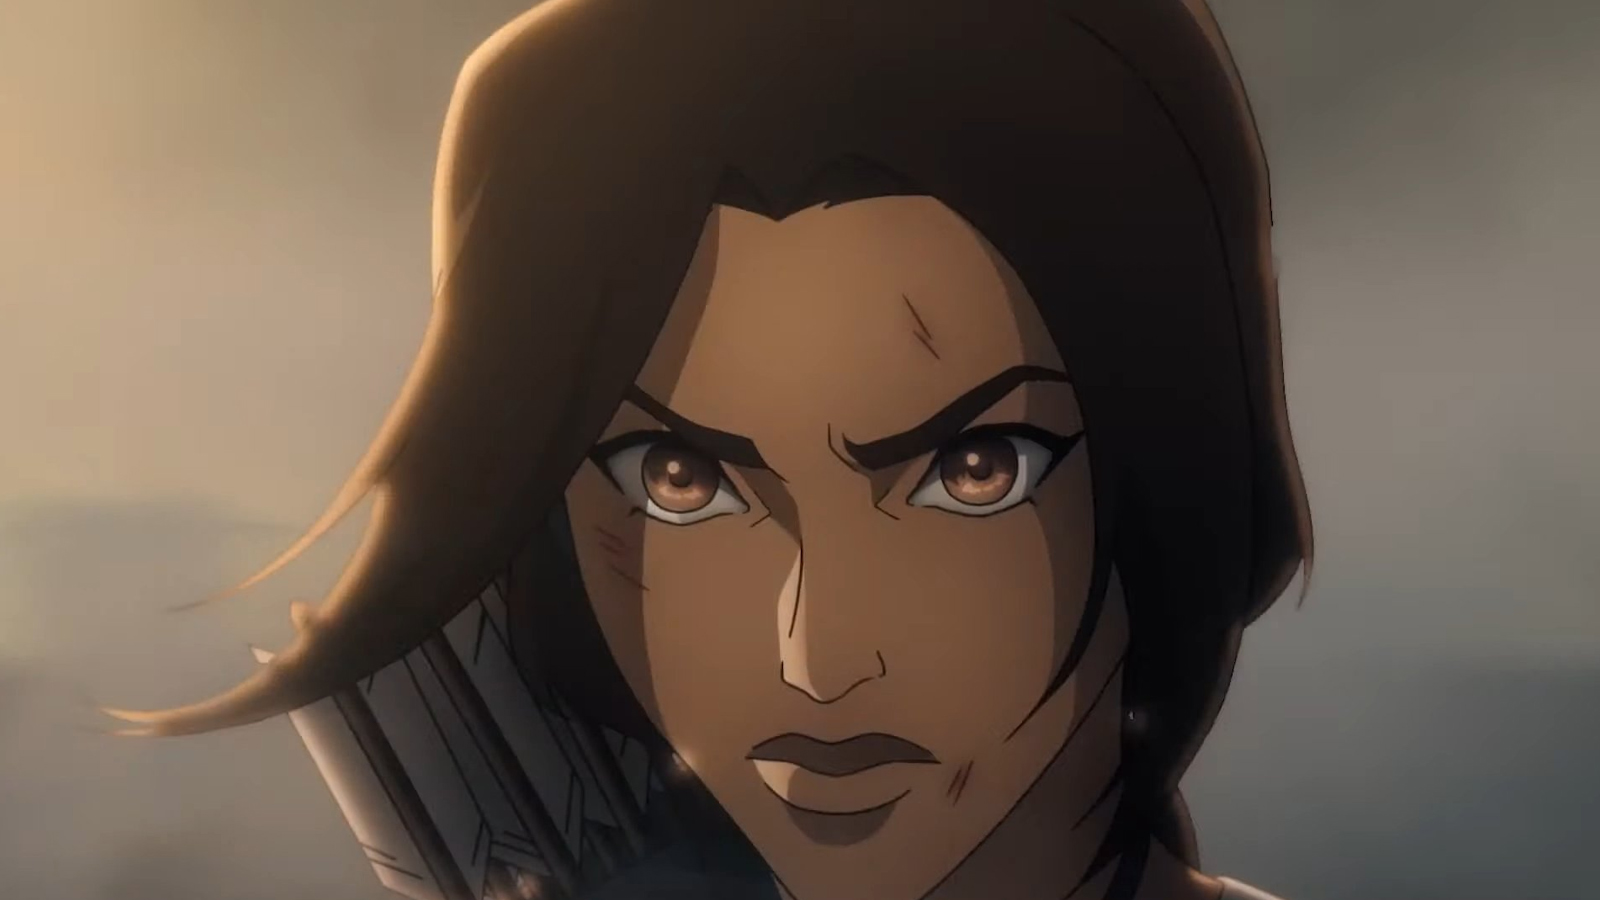 Tomb Raider anime: Story, characters, voice actors, trailer